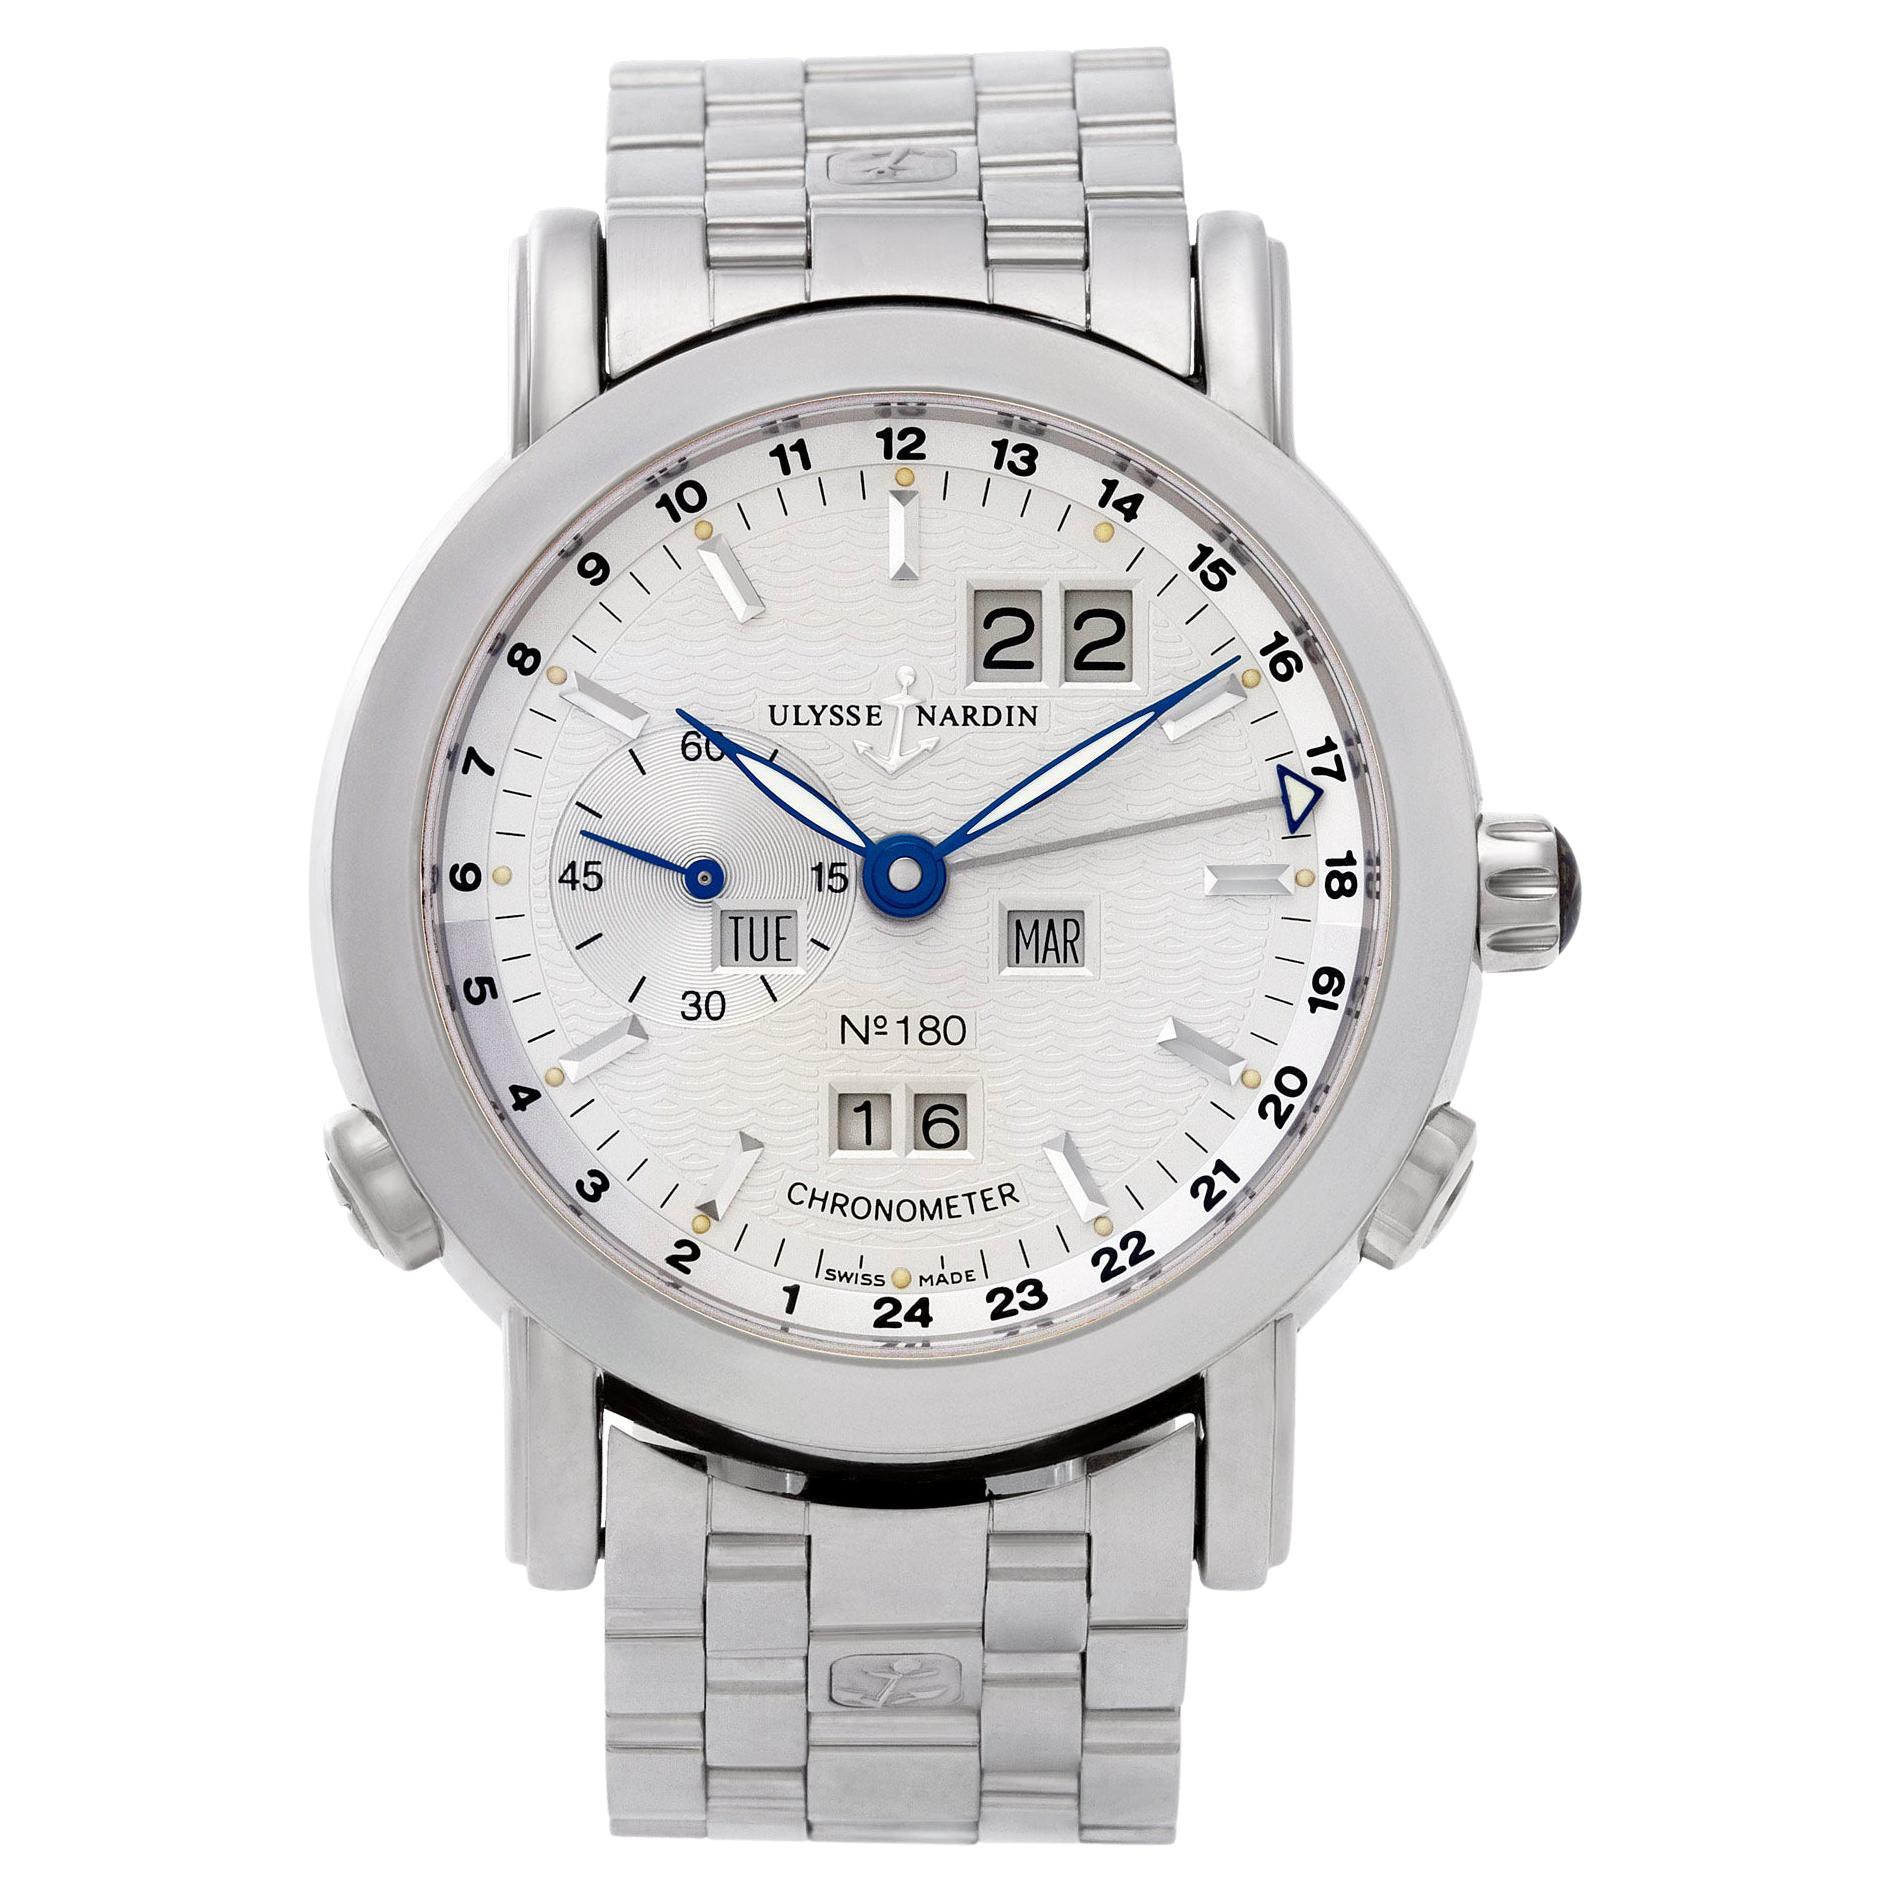 Ulysse Nardin Perpetual Calendar in Platinum Limited Edition of 500 Pieces For Sale